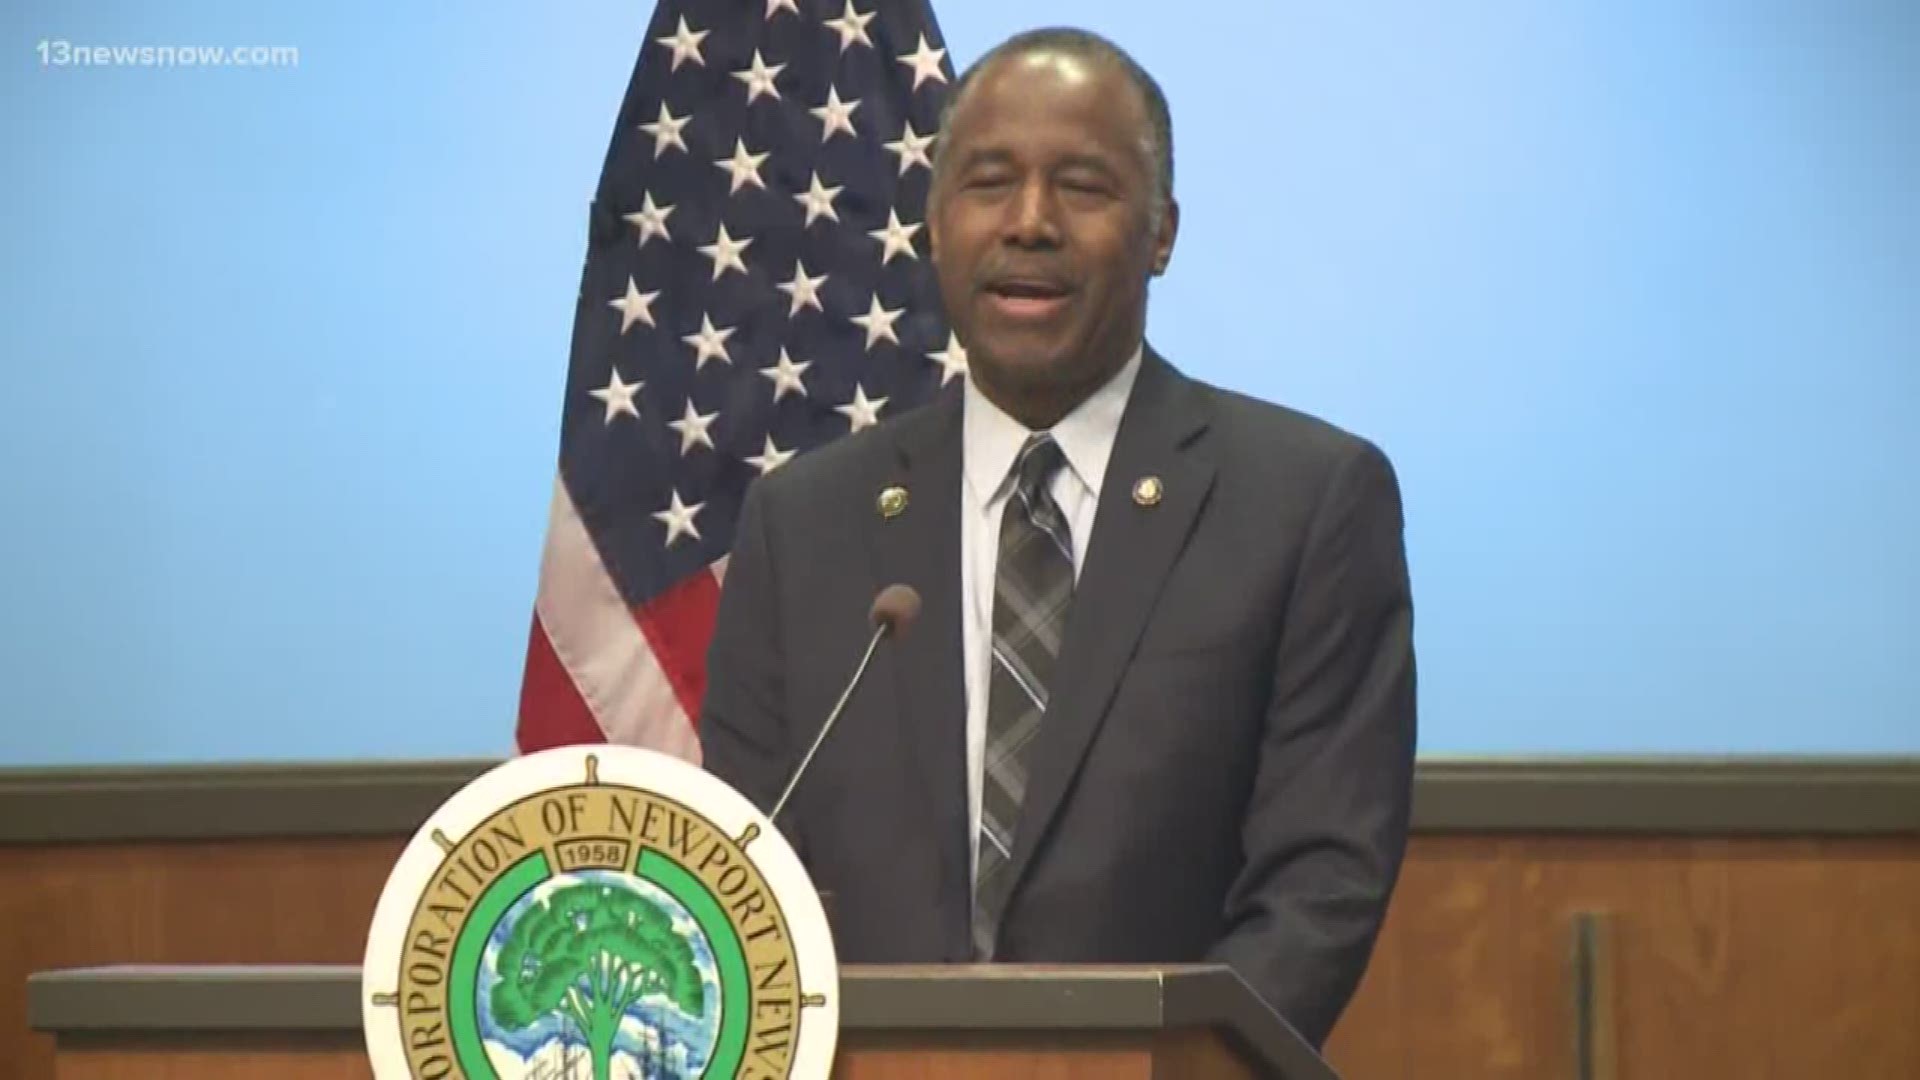 Ben Carson announced Newport News and Norfolk would receive $30 million each from the United States Department of Housing and Urban Development to kickstart redevelopment efforts.